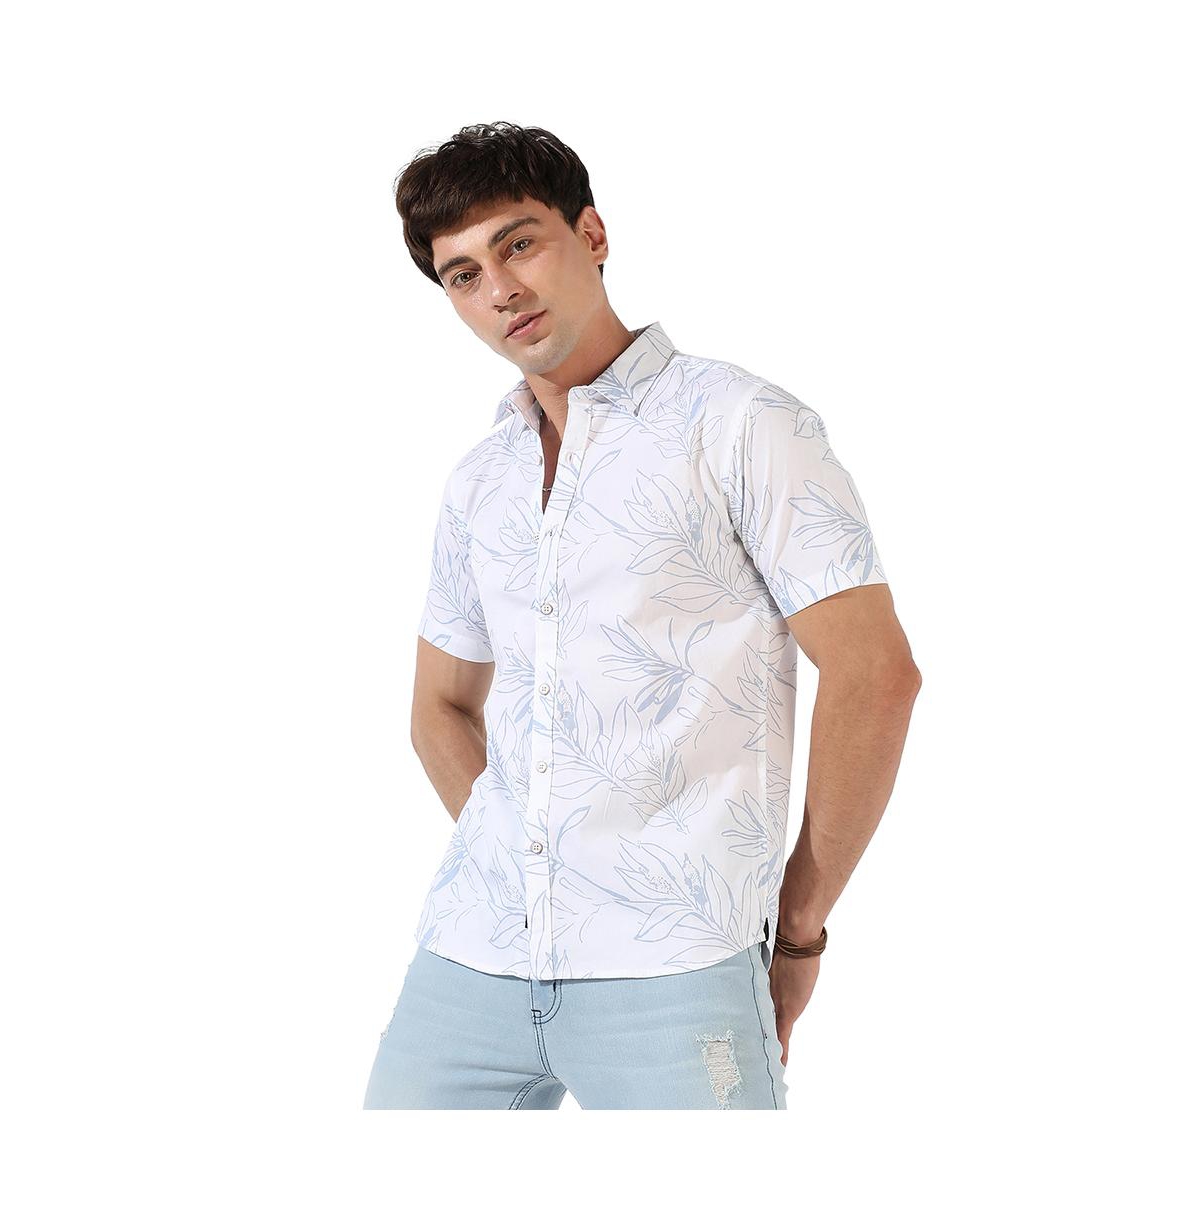 CAMPUS SUTRA MEN'S WHITE PRINTED REGULAR FIT CASUAL SHIRT